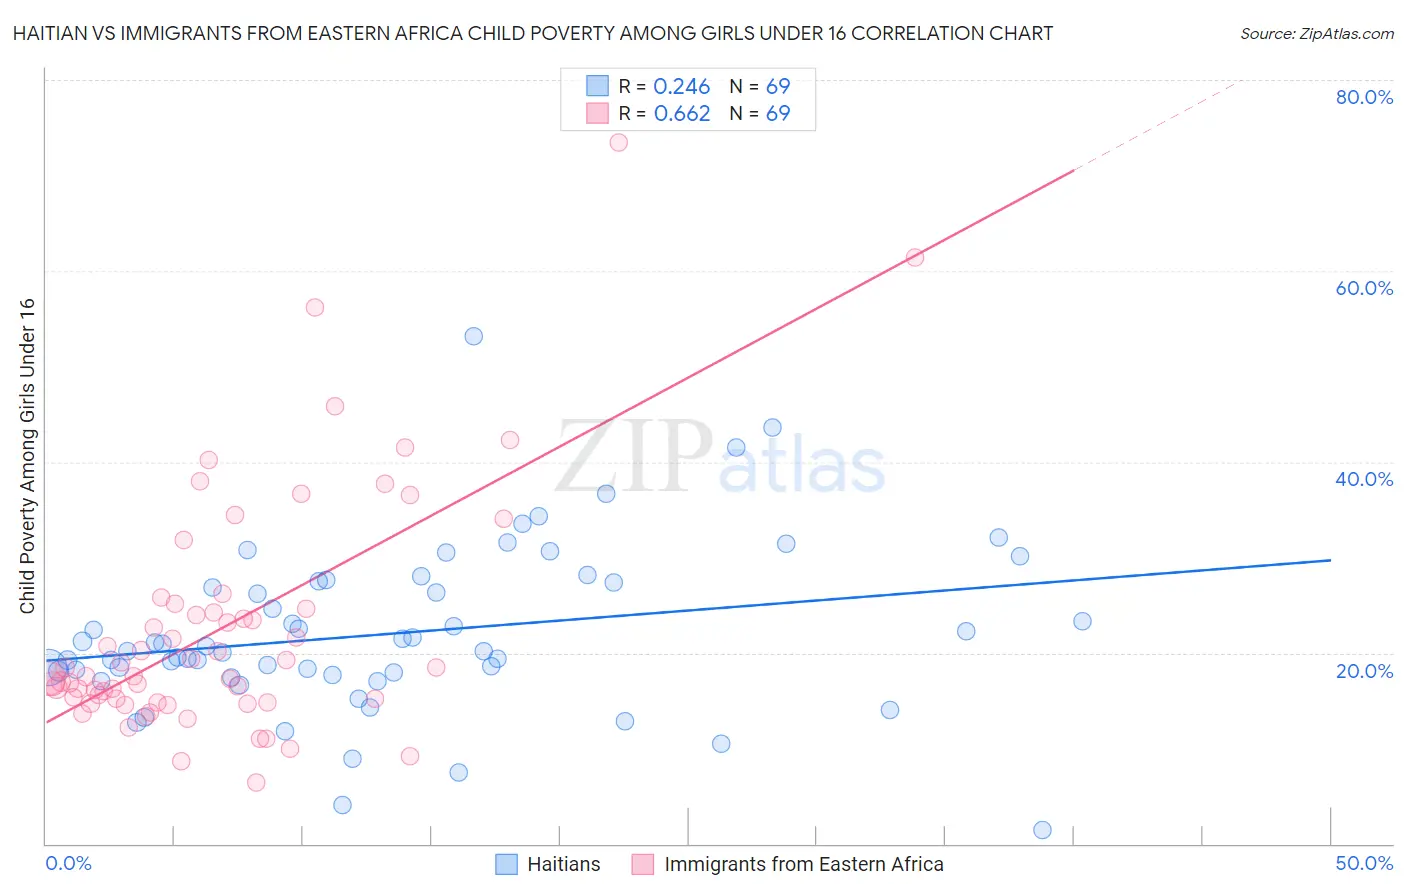 Haitian vs Immigrants from Eastern Africa Child Poverty Among Girls Under 16